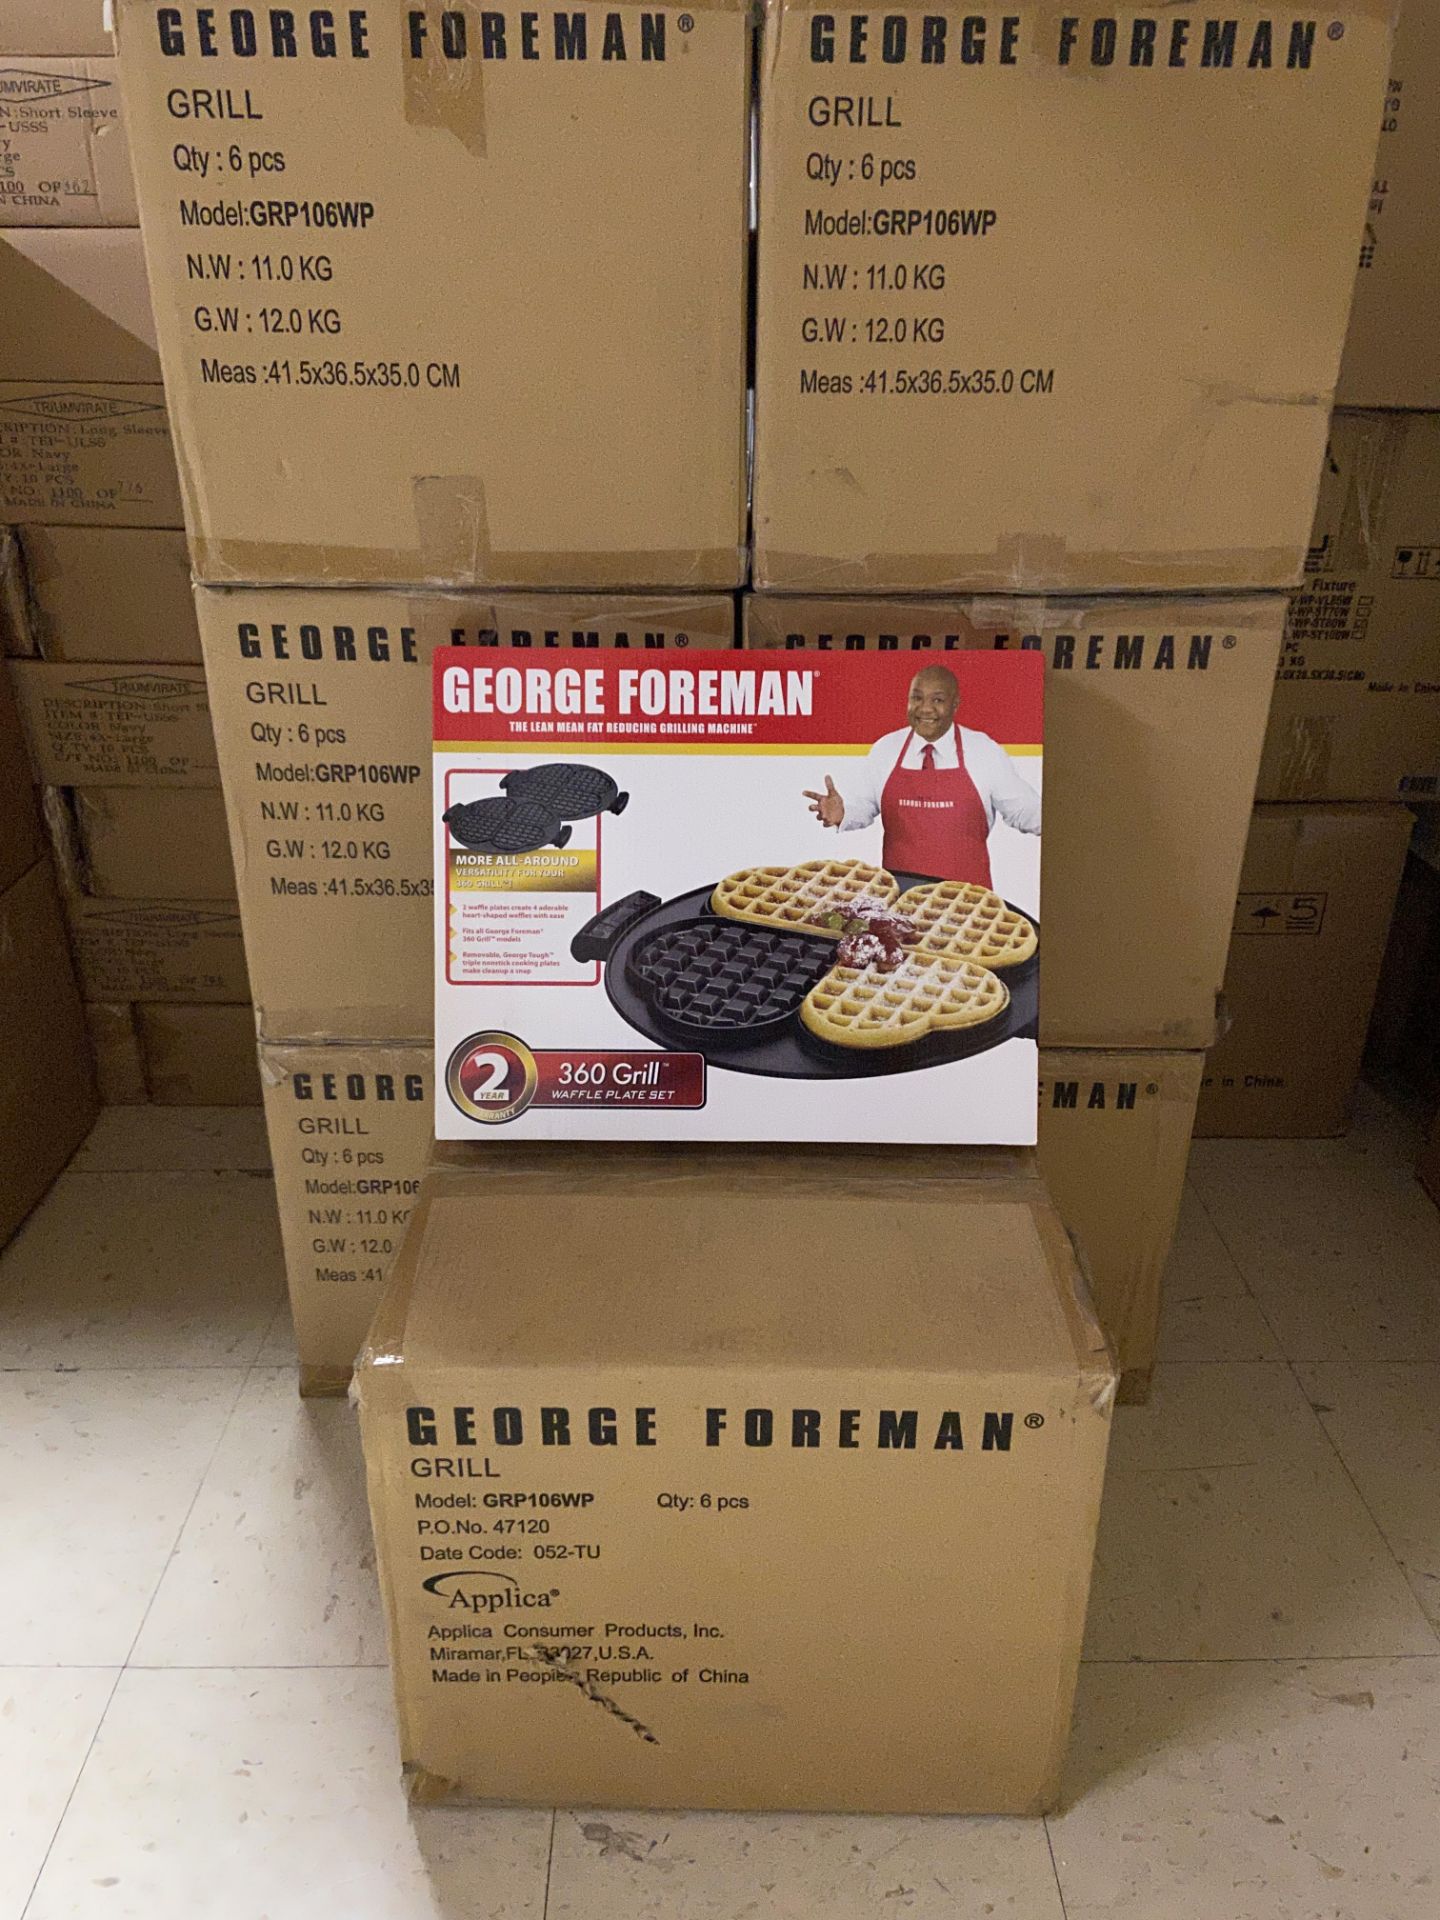 55 George Forman 360 Grill Waffle Plate Sets New in Box - Image 3 of 4